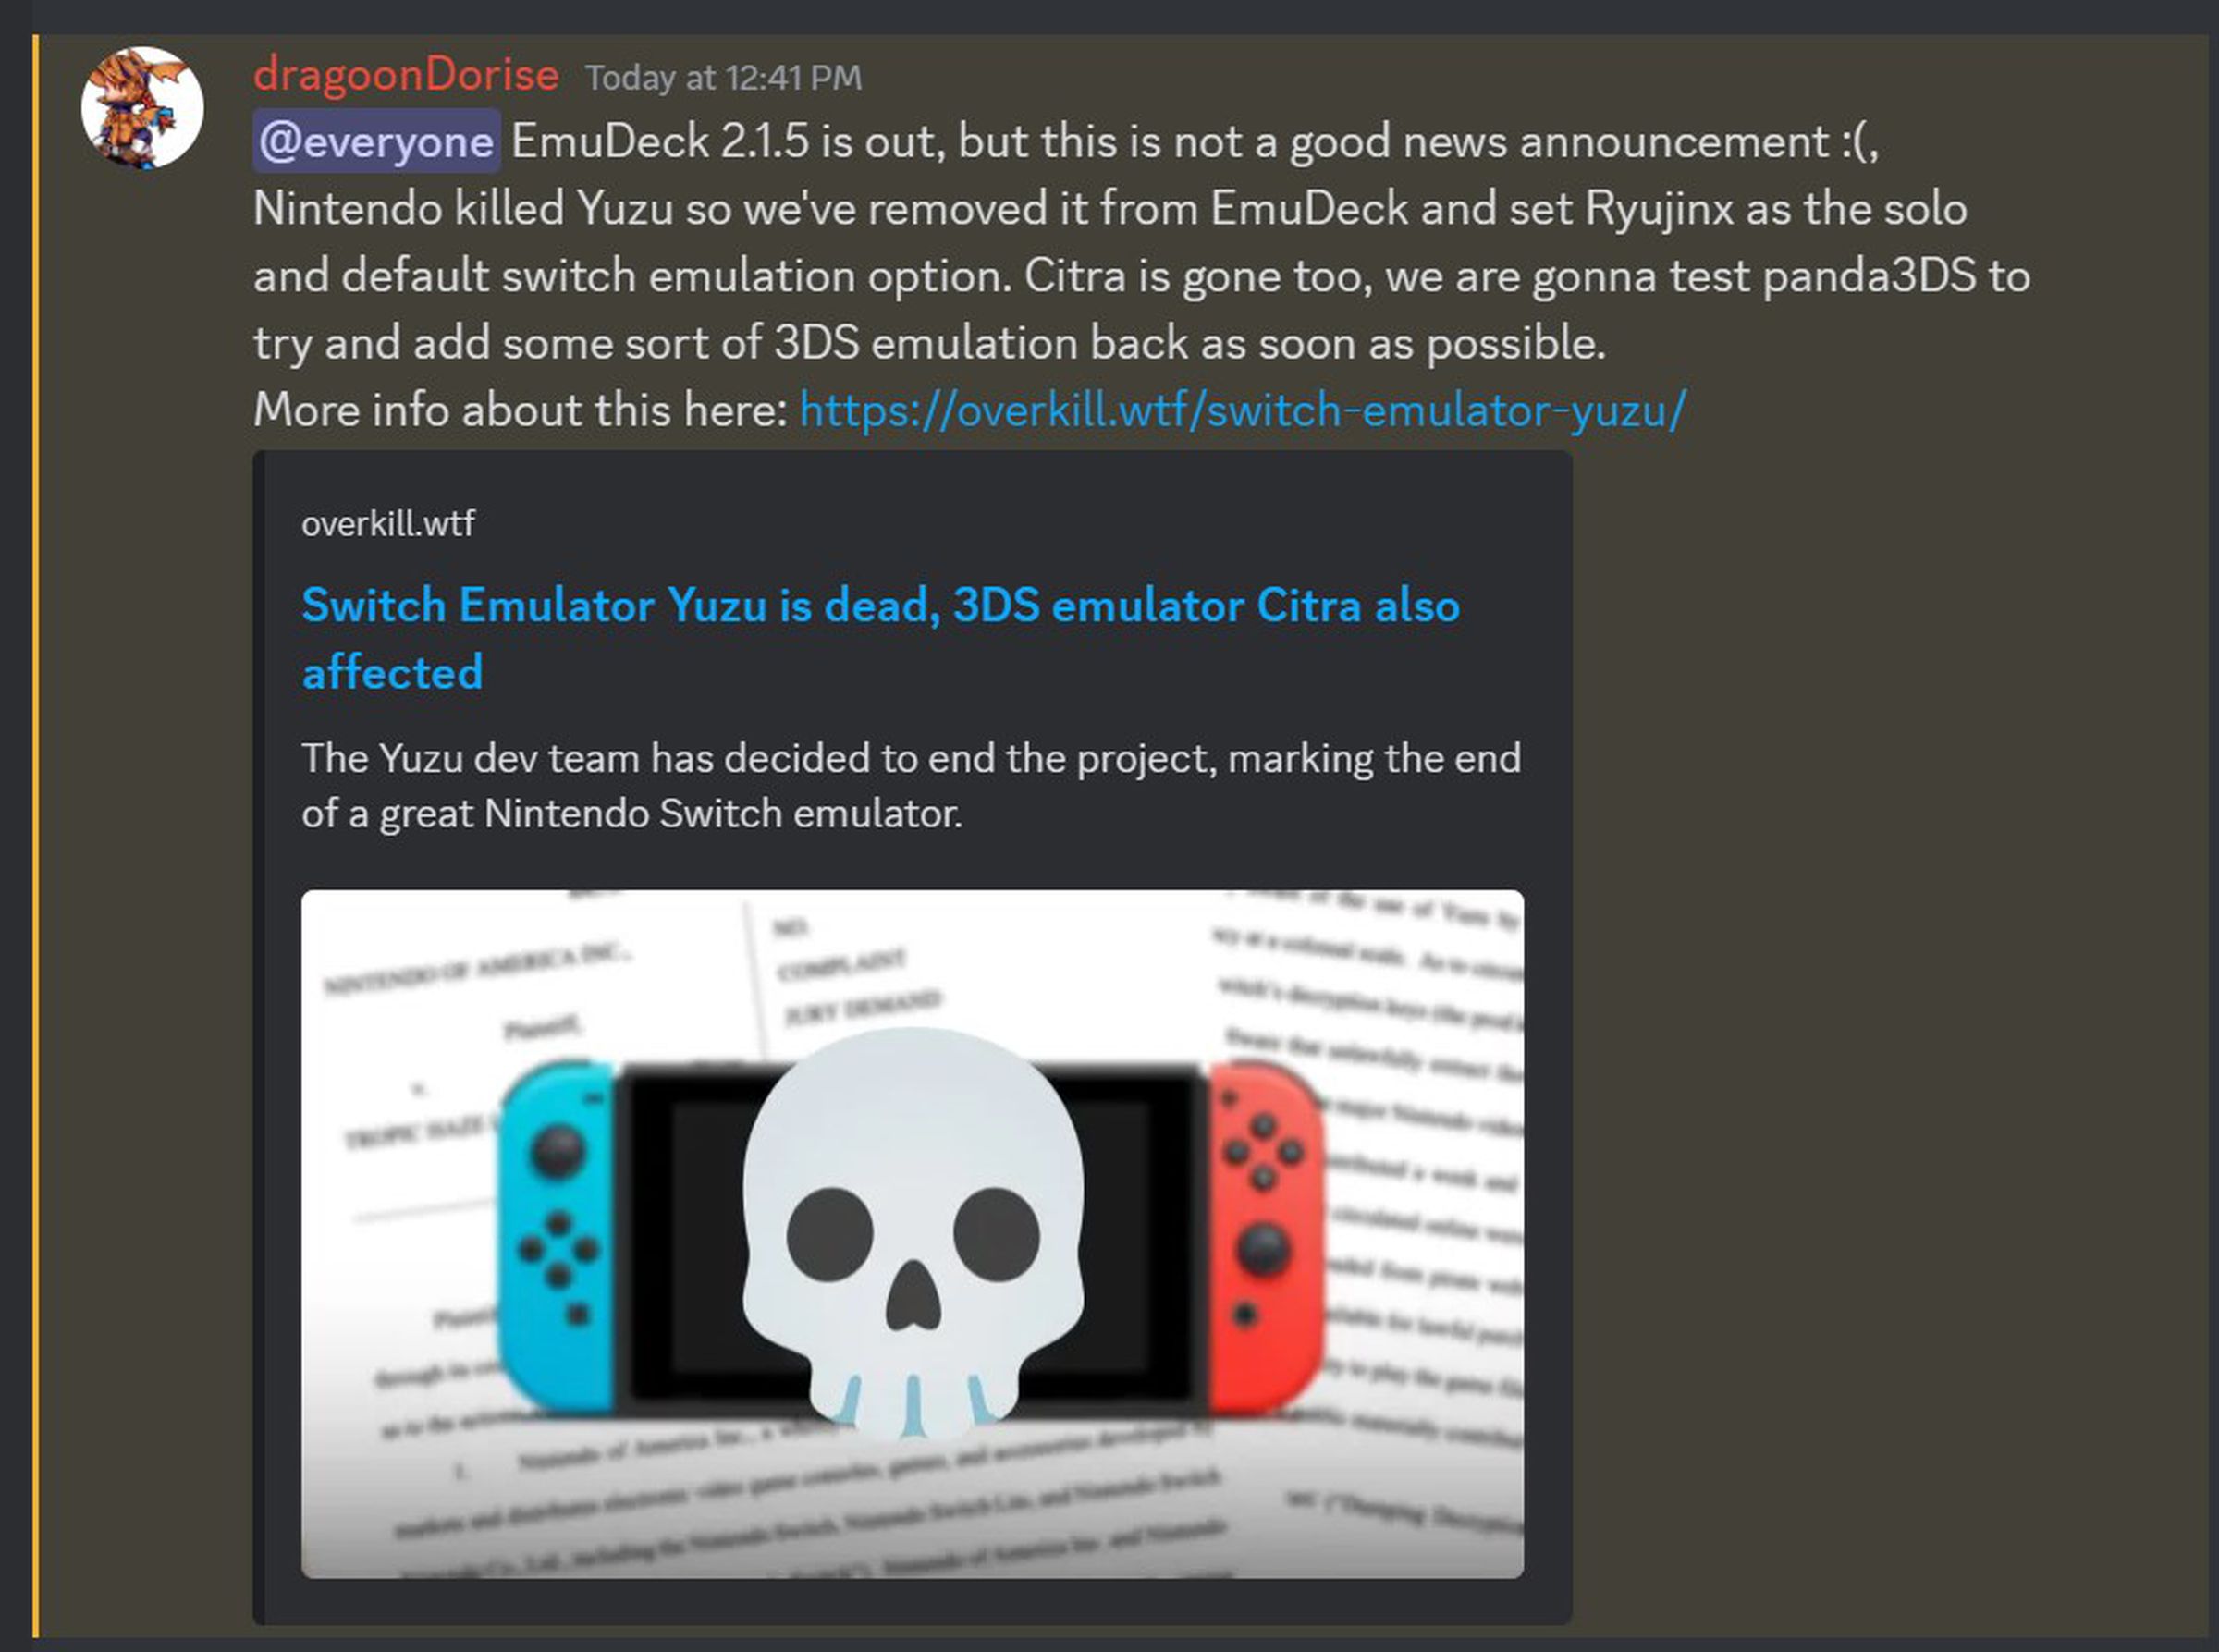 “This is not a good news announcement :(“ writes EmuDeck’s lead developer.